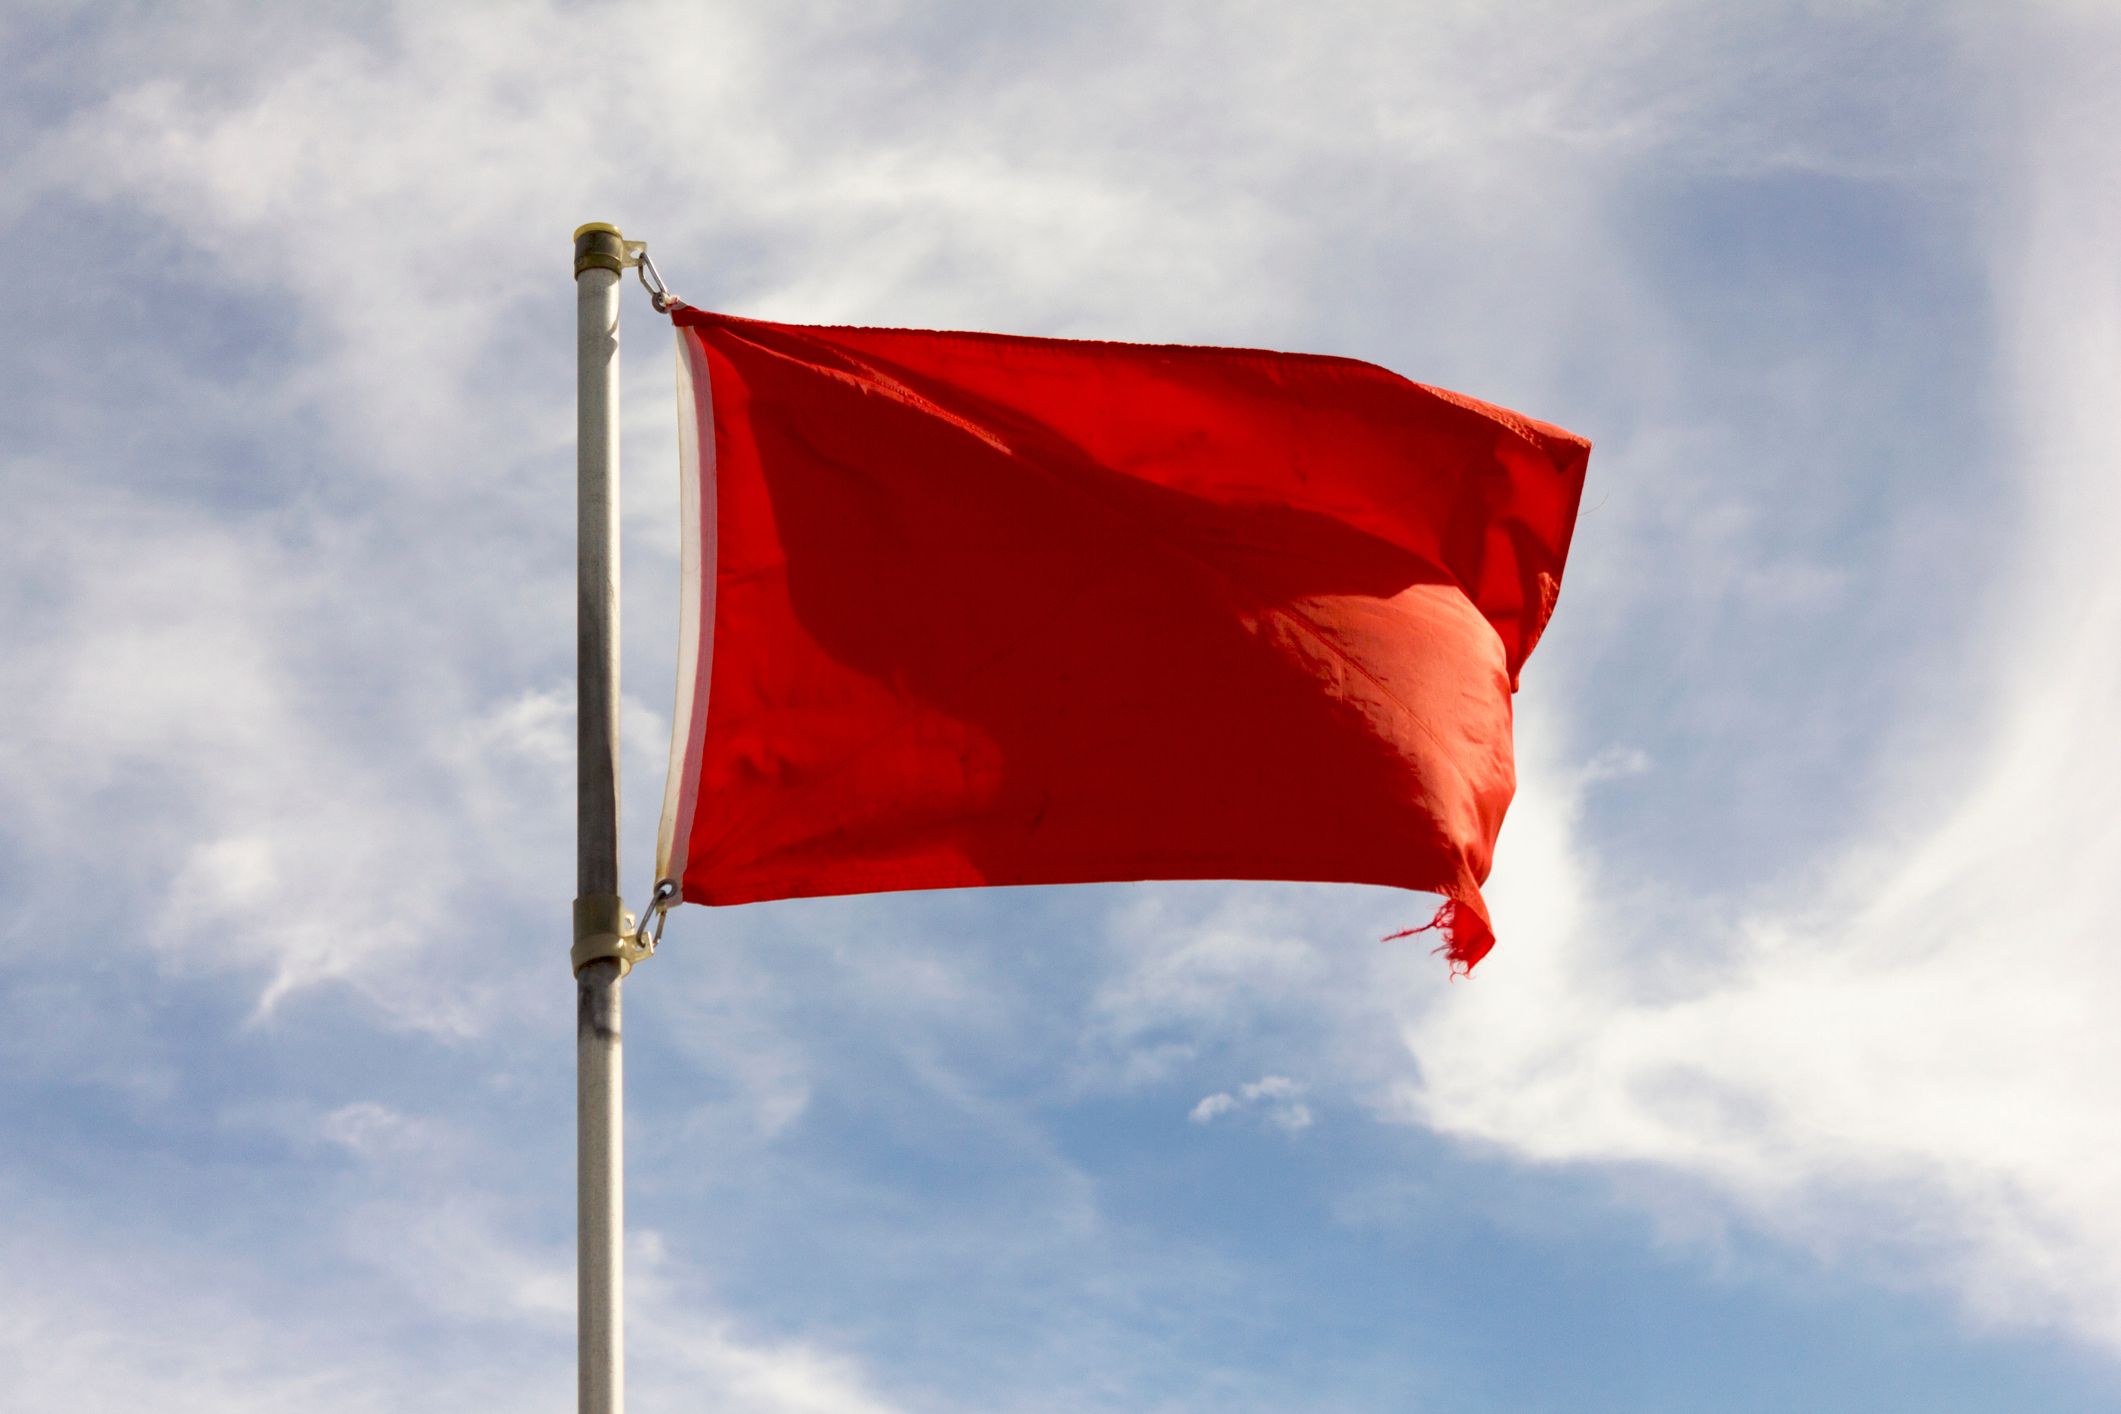 20 Big Relationship Red Flags - Breakup Warning Signs